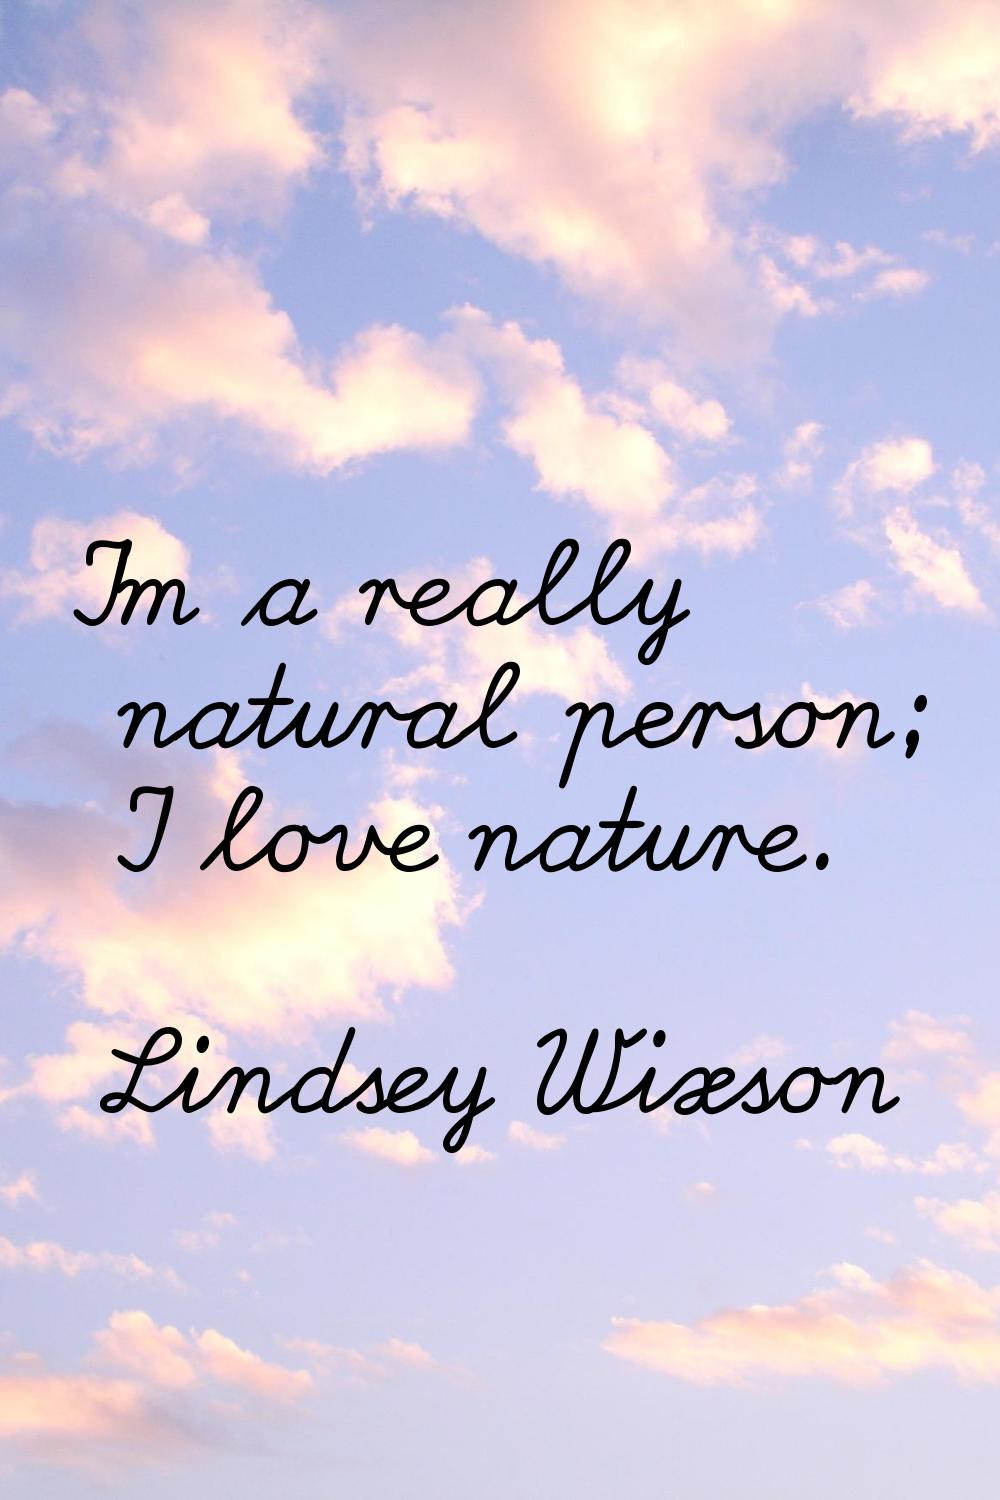 I'm a really natural person; I love nature.